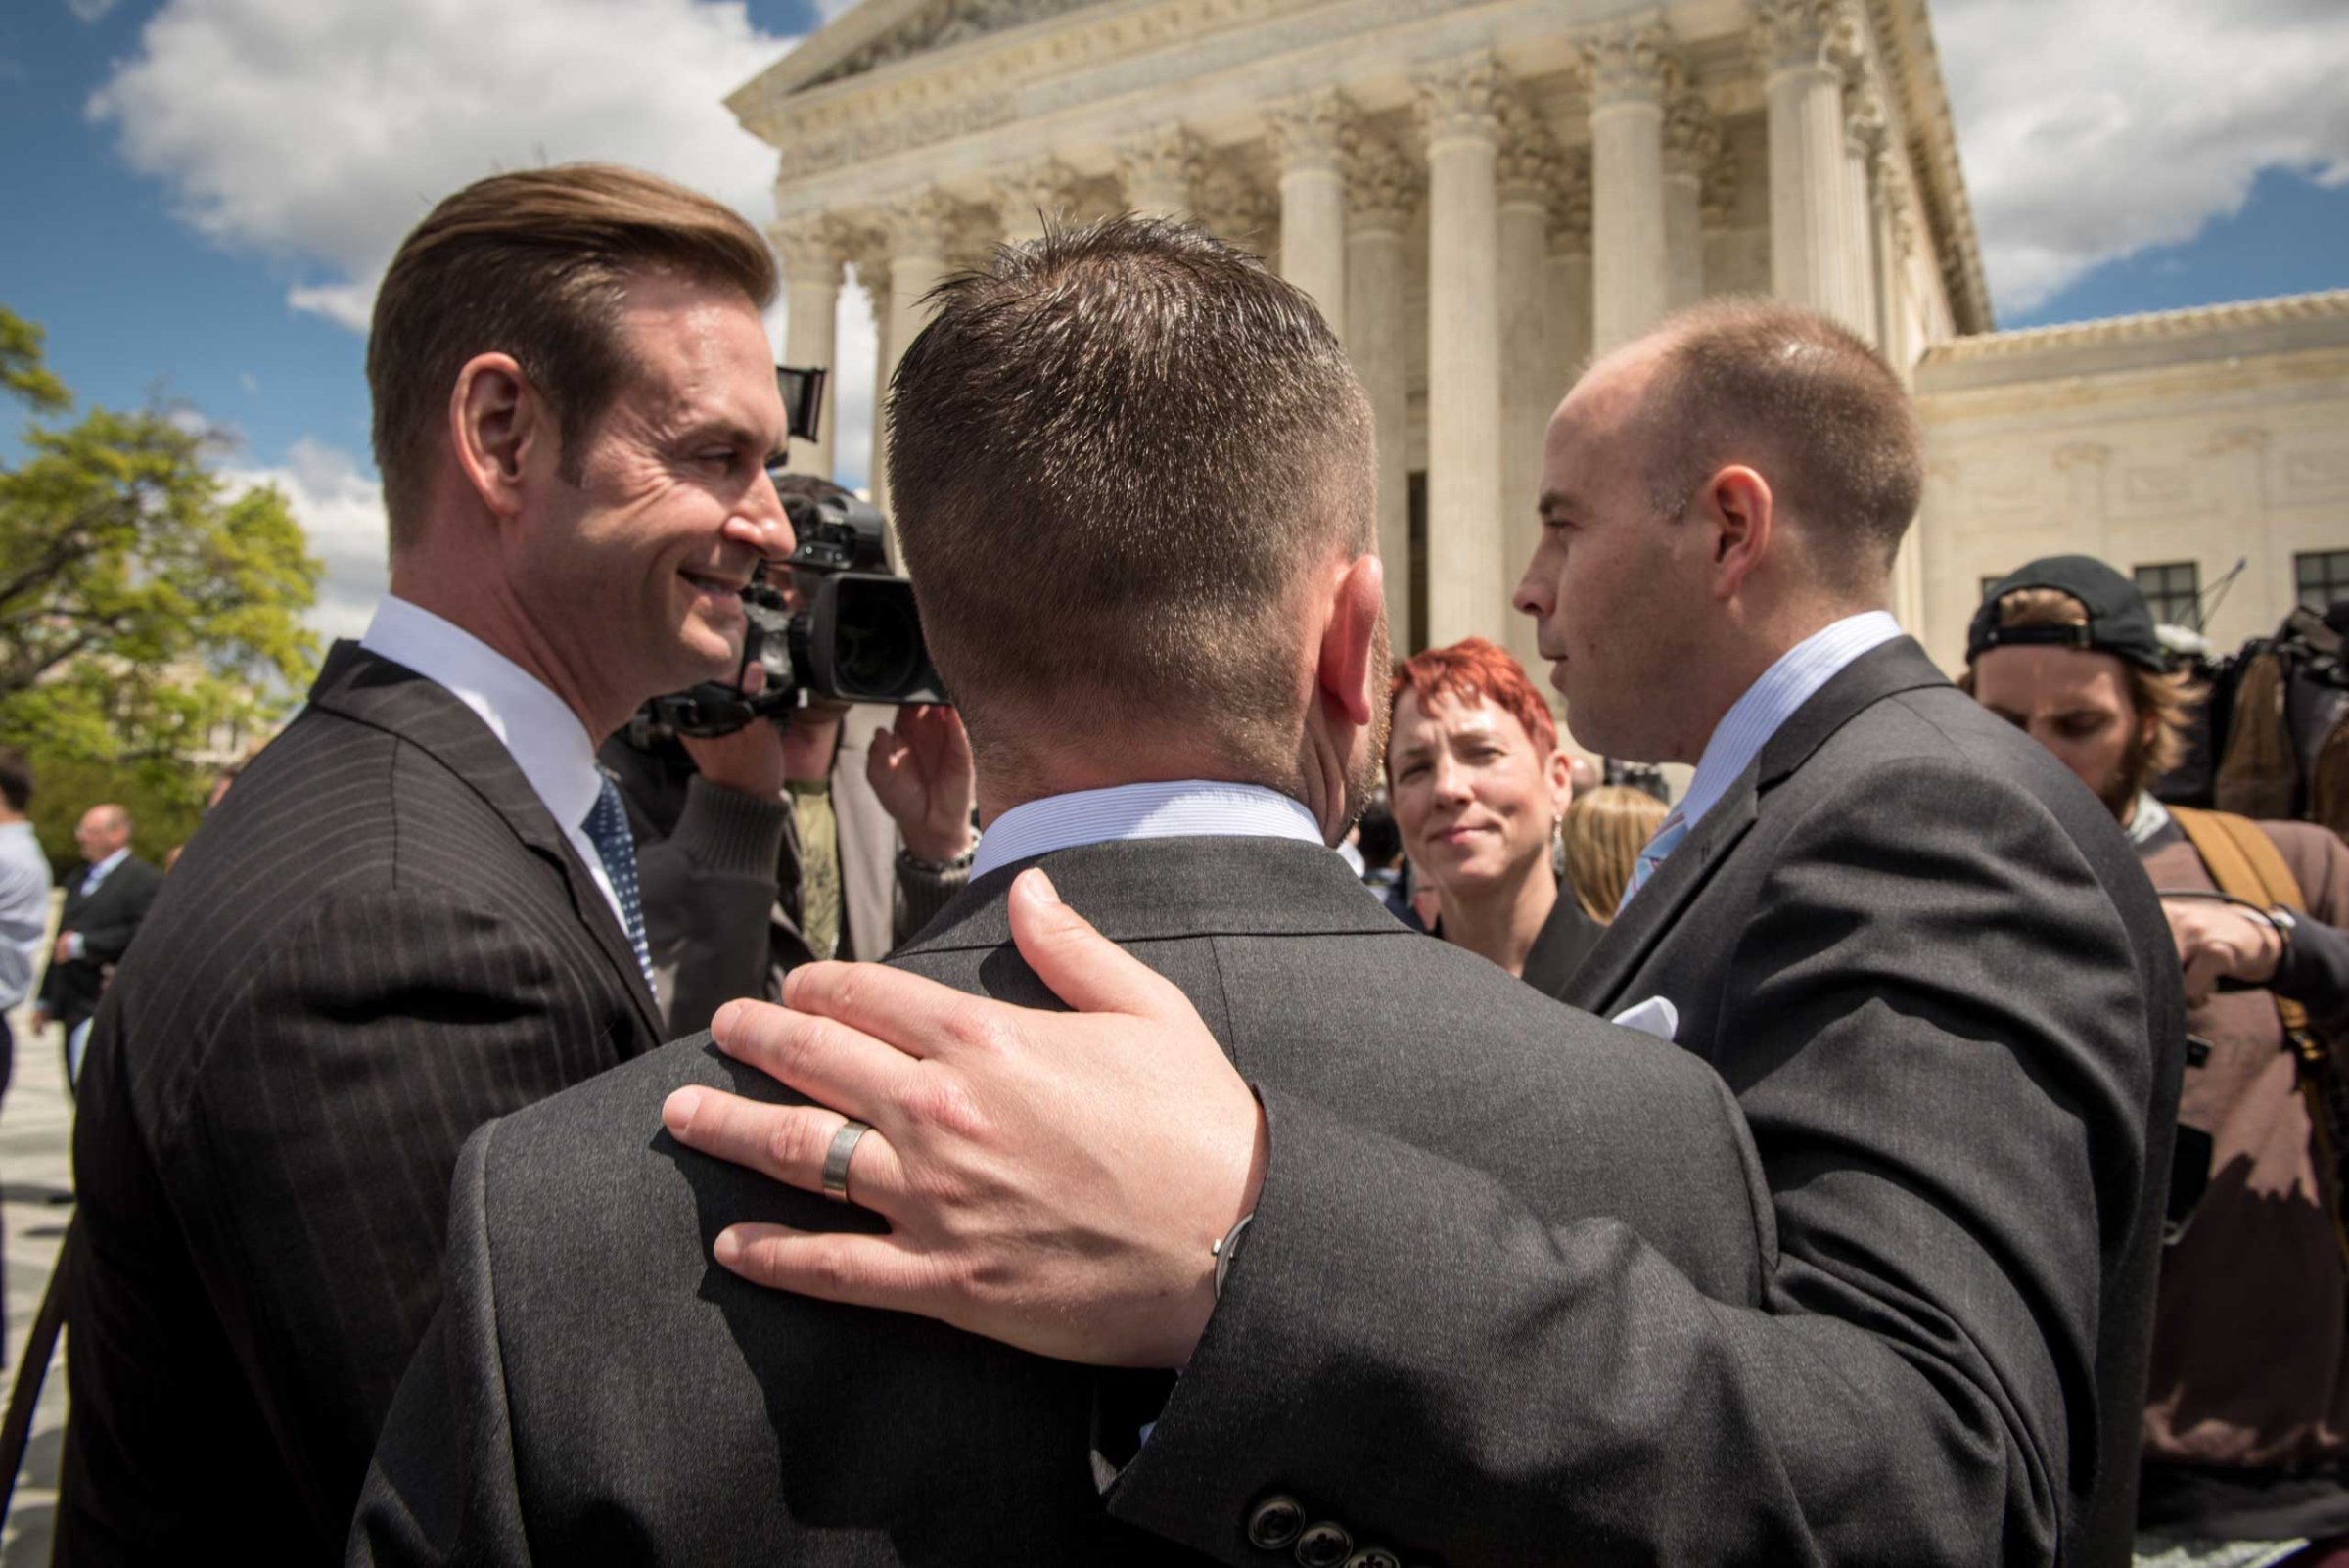 Plaintiffs Thomas Kostra, center and his husband Ijpe Dekoe, right, from Tennessee, speak with the media outside the Supreme Court of the United States following arguments on marriage equality in Washington on April 28, 2015.